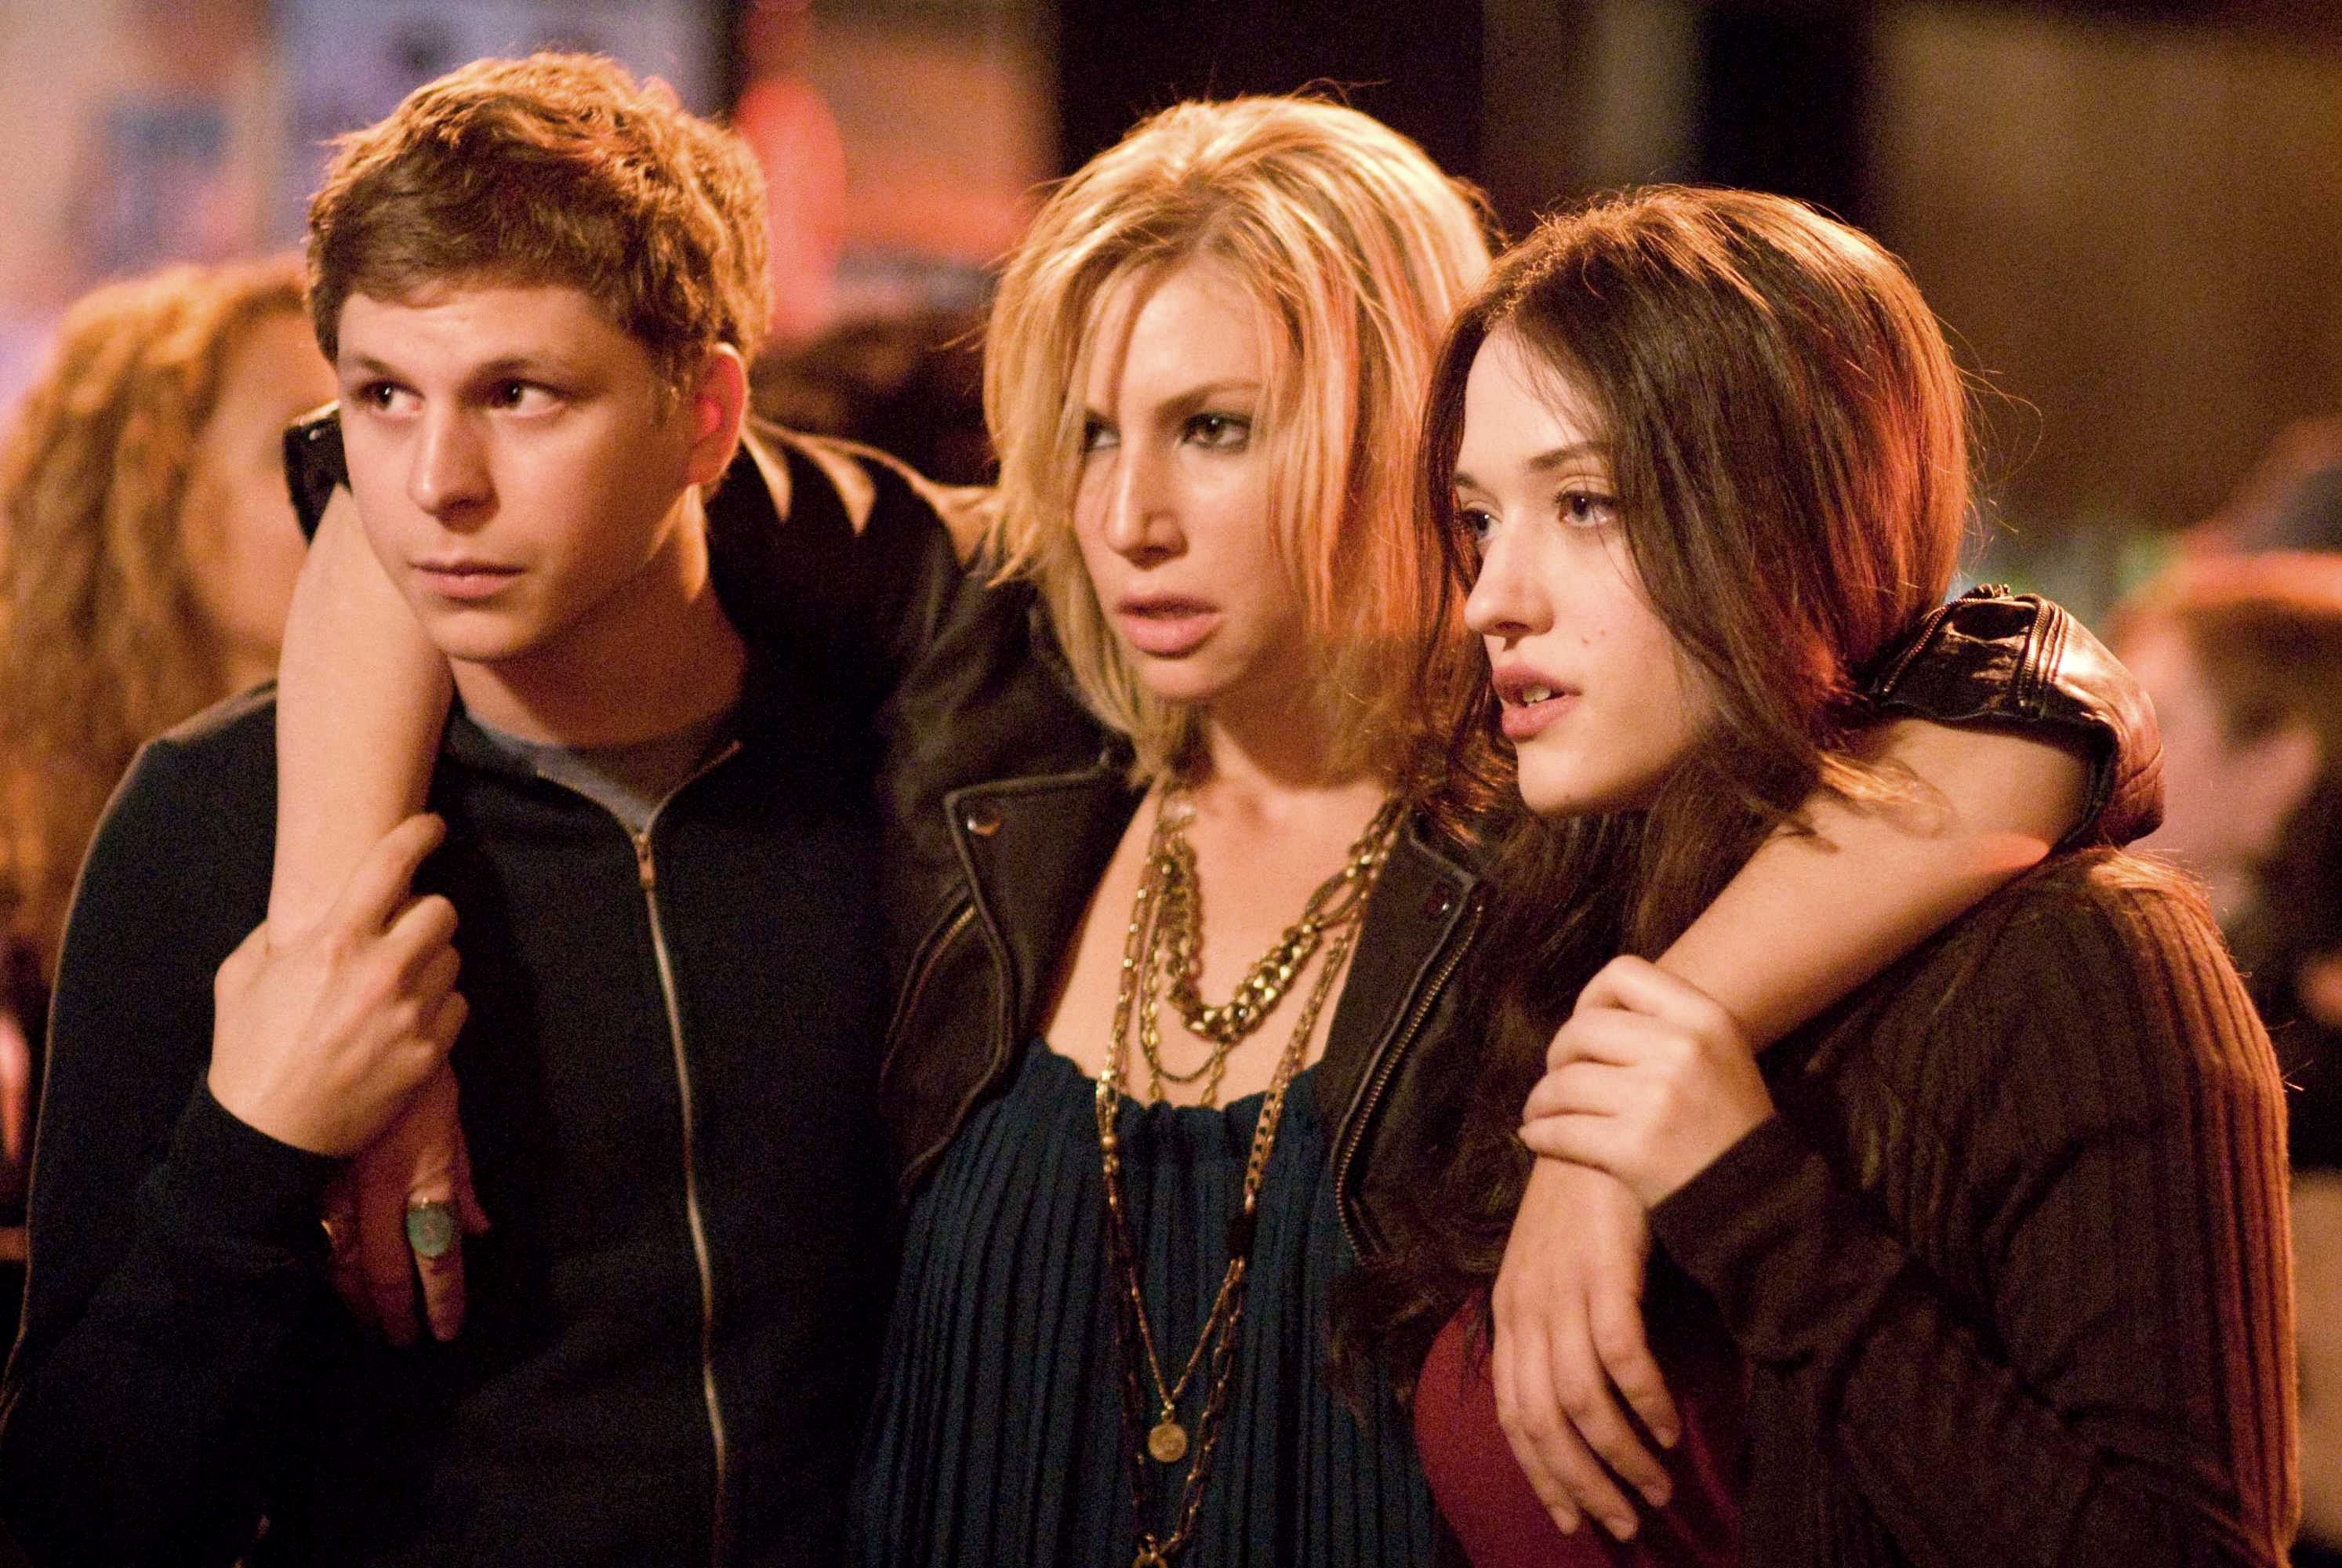 Michael Cera, Ari Graynor and Kat Dennings in Sony Pictures' Nick and Norah's Infinite Playlist (2008)